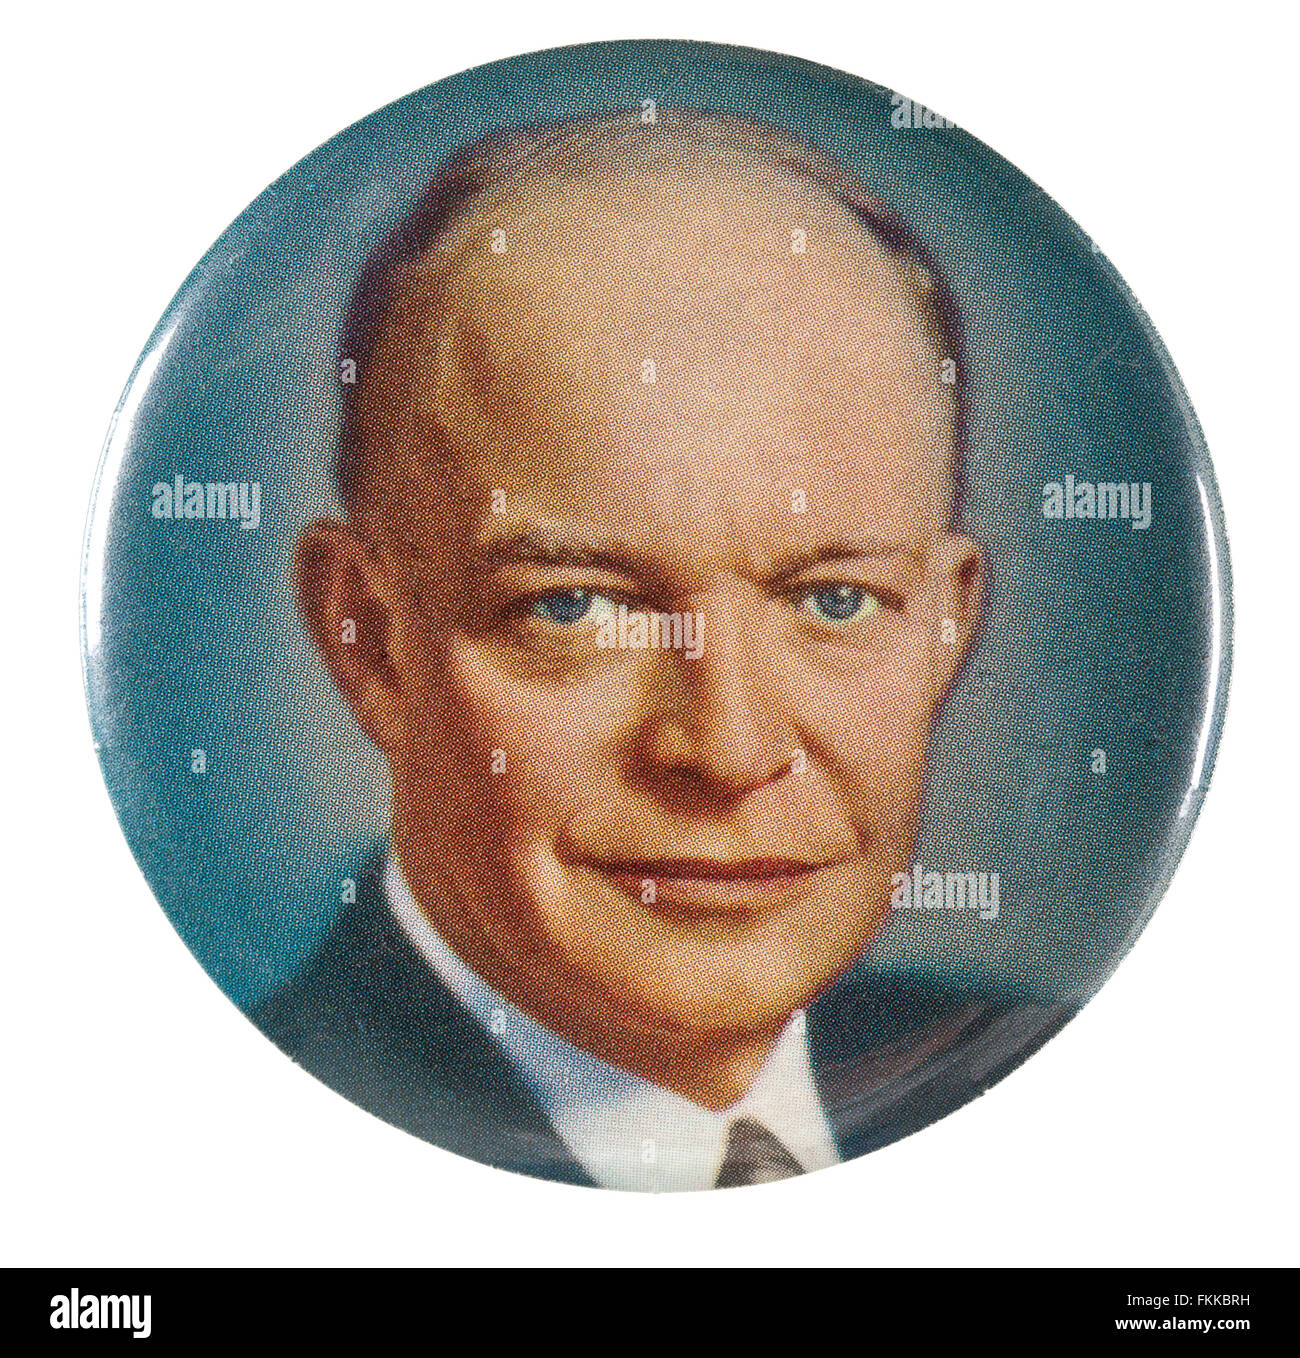 1950s Dwight D Eisenhower picture pinback button pin Stock Photo